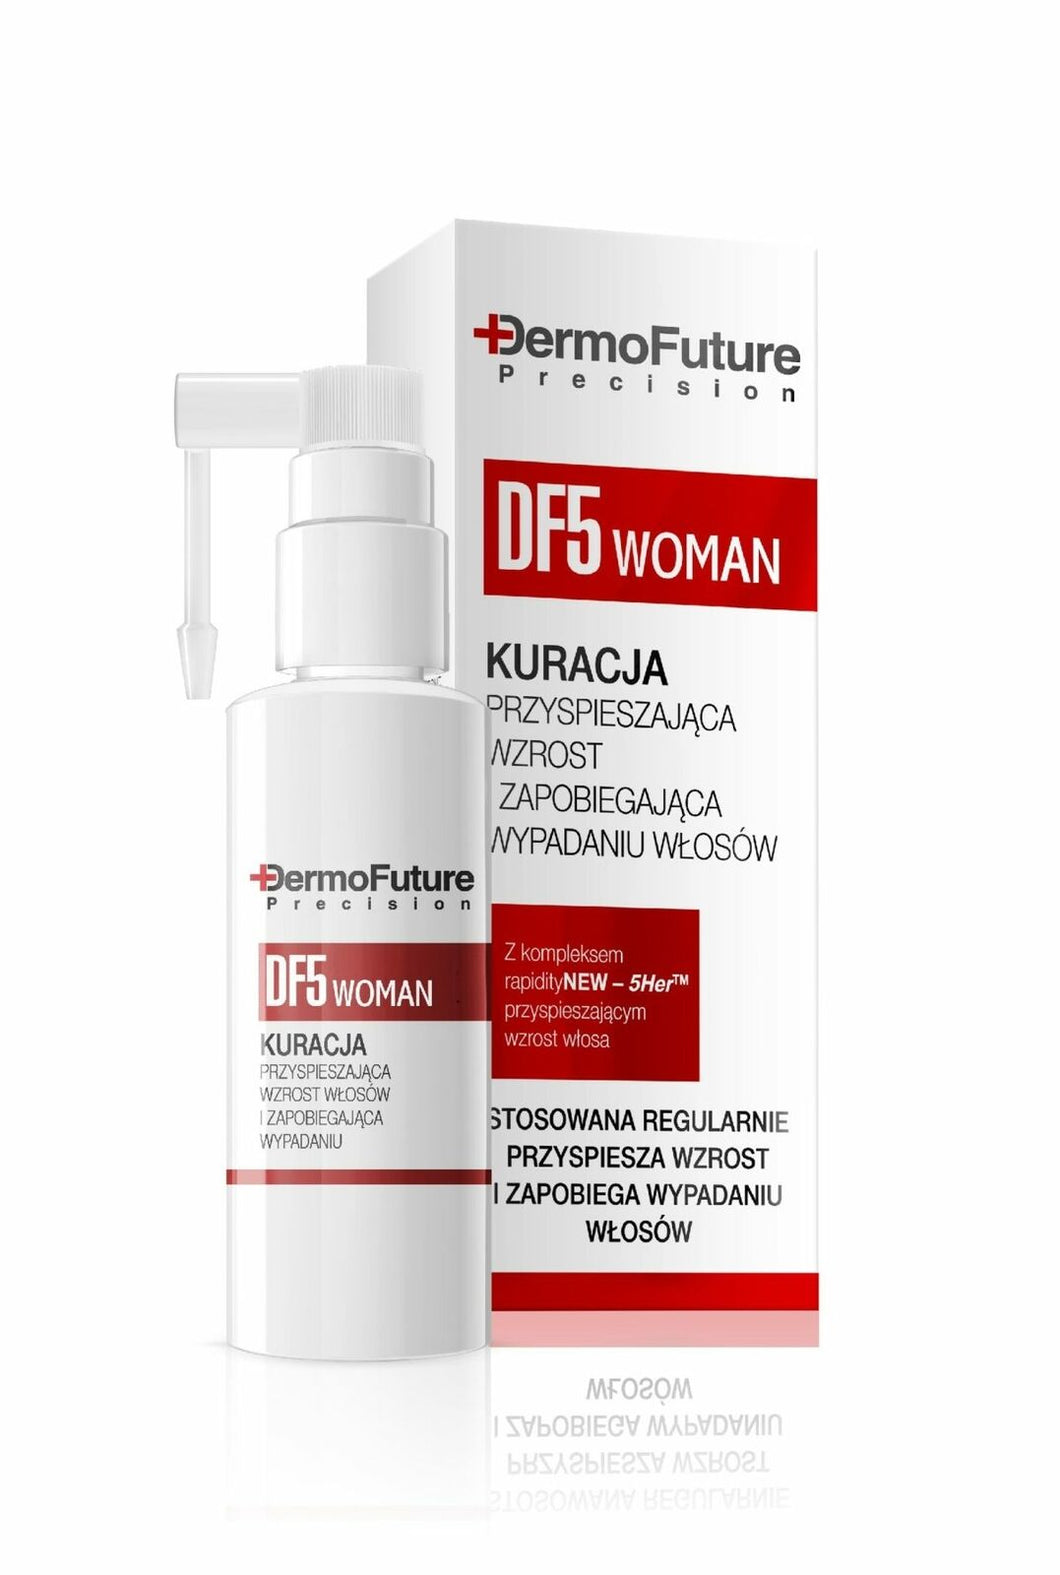 DermoFuture Df5 Woman Treatment Accelerating Growth & Preventing Hair Loss 30ml